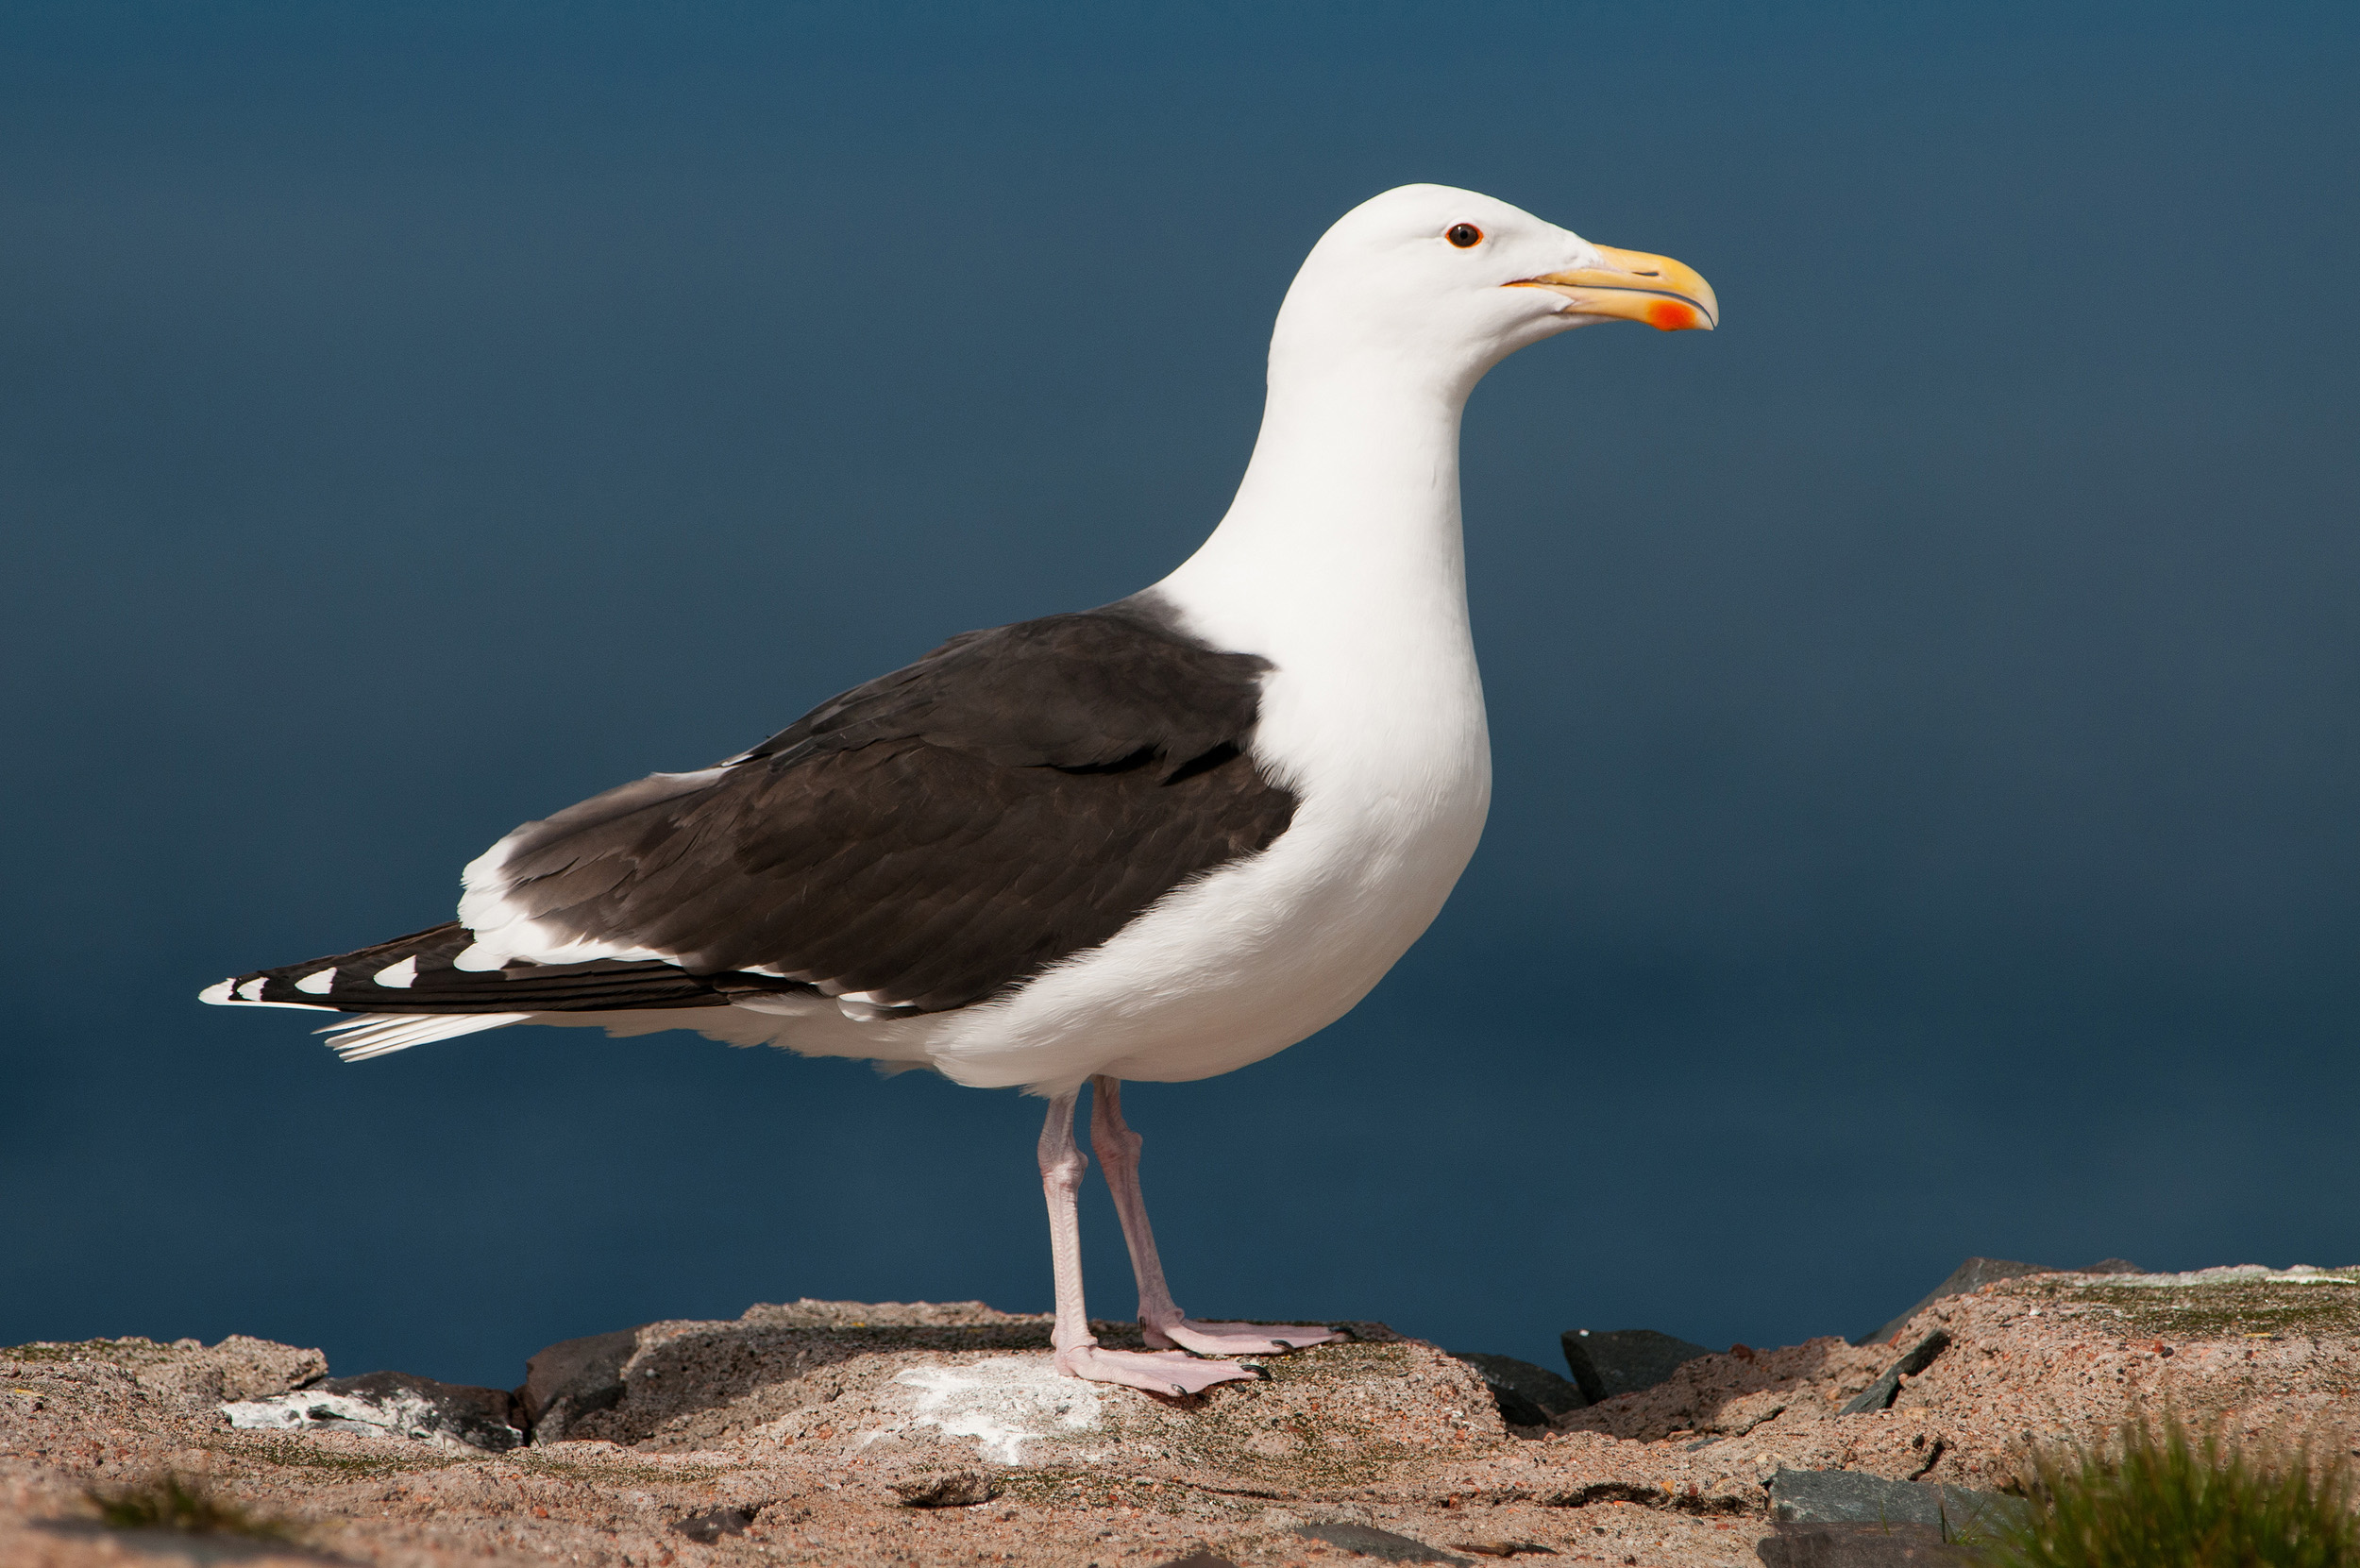 A lone Great Black-backed Gull stood on the edge of a rock overlooking the sea.